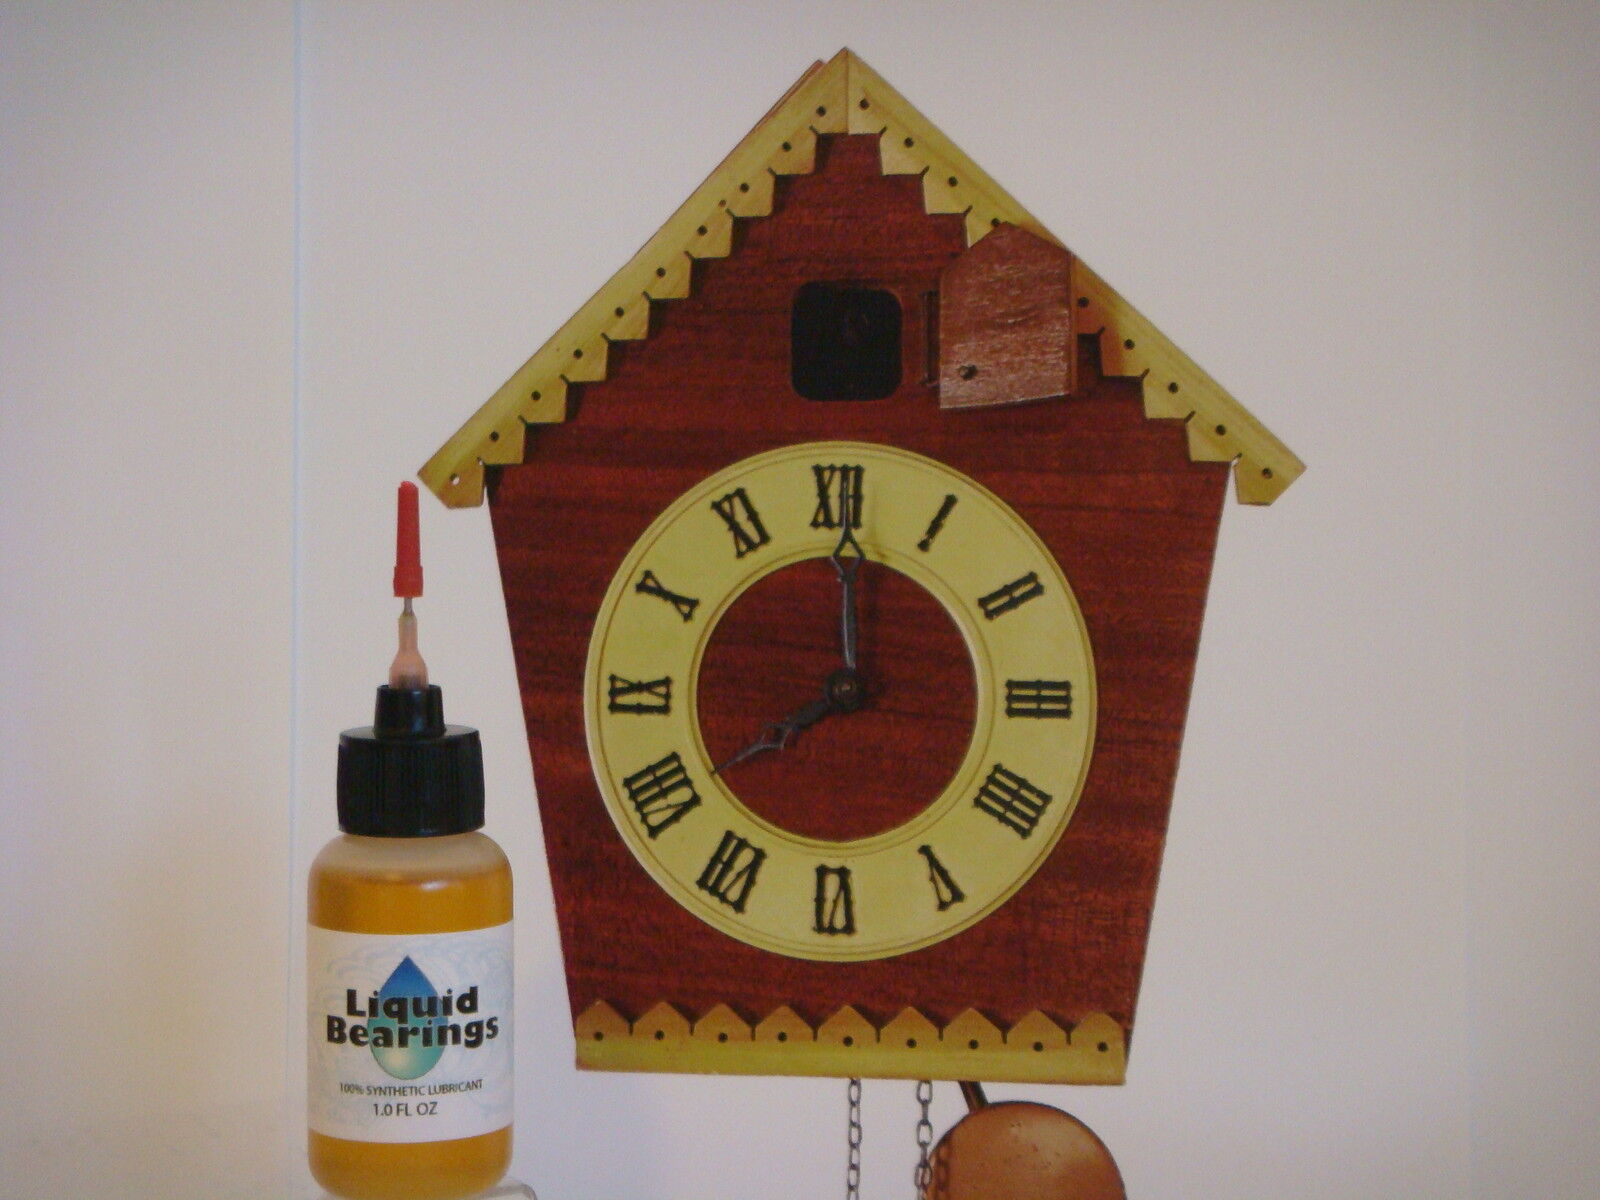 Liquid Bearings, BEST 100%-synthetic oil for Cuckoo or any vintage clocks, READ